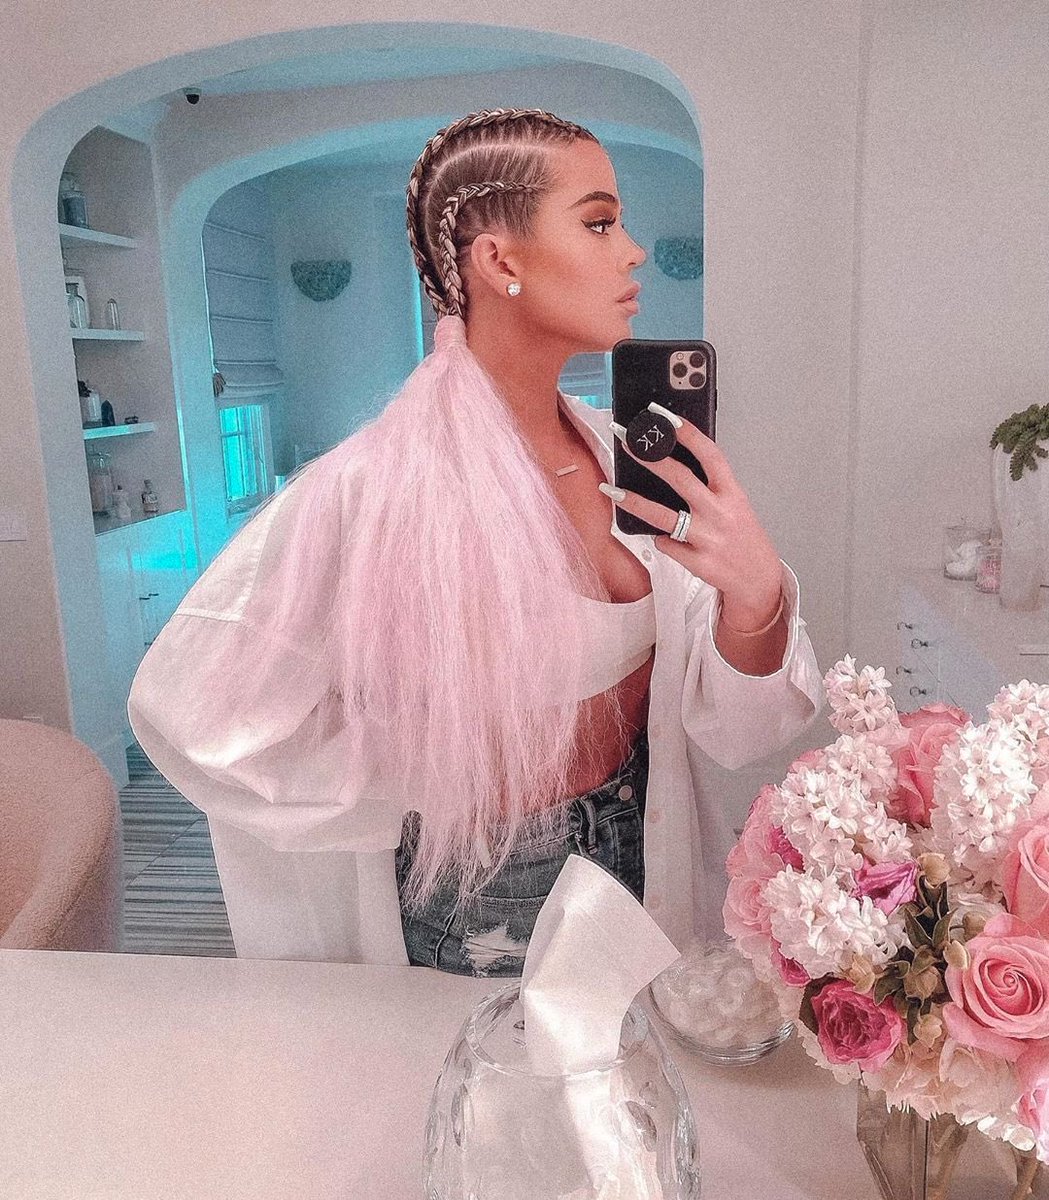 Now Khloe, just like her sisters, has a long history of consistently stealing black hairstyles. She’s also claimed that she “does not see color” but when people claim that what they’re really doing is denying responsibility for their privilege and the existence of modern racism